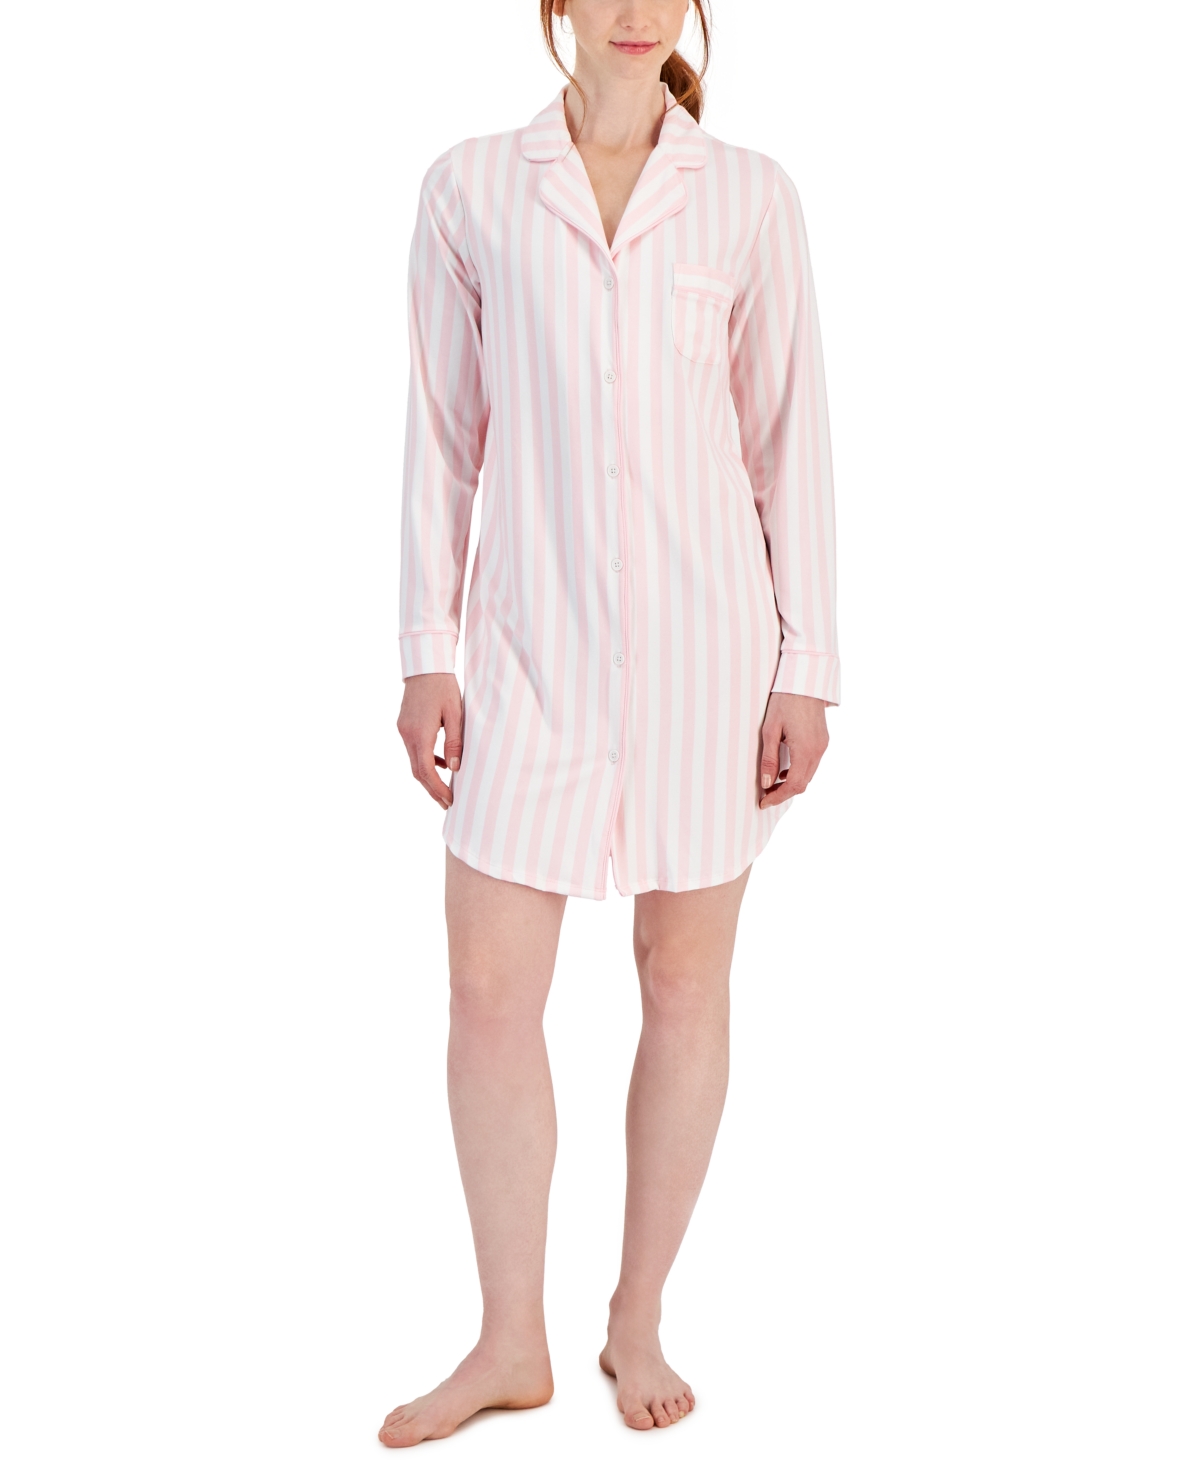 Sueded Super Soft Knit Sleepshirt Nightgown, Created for Macy's - Pink Stripe